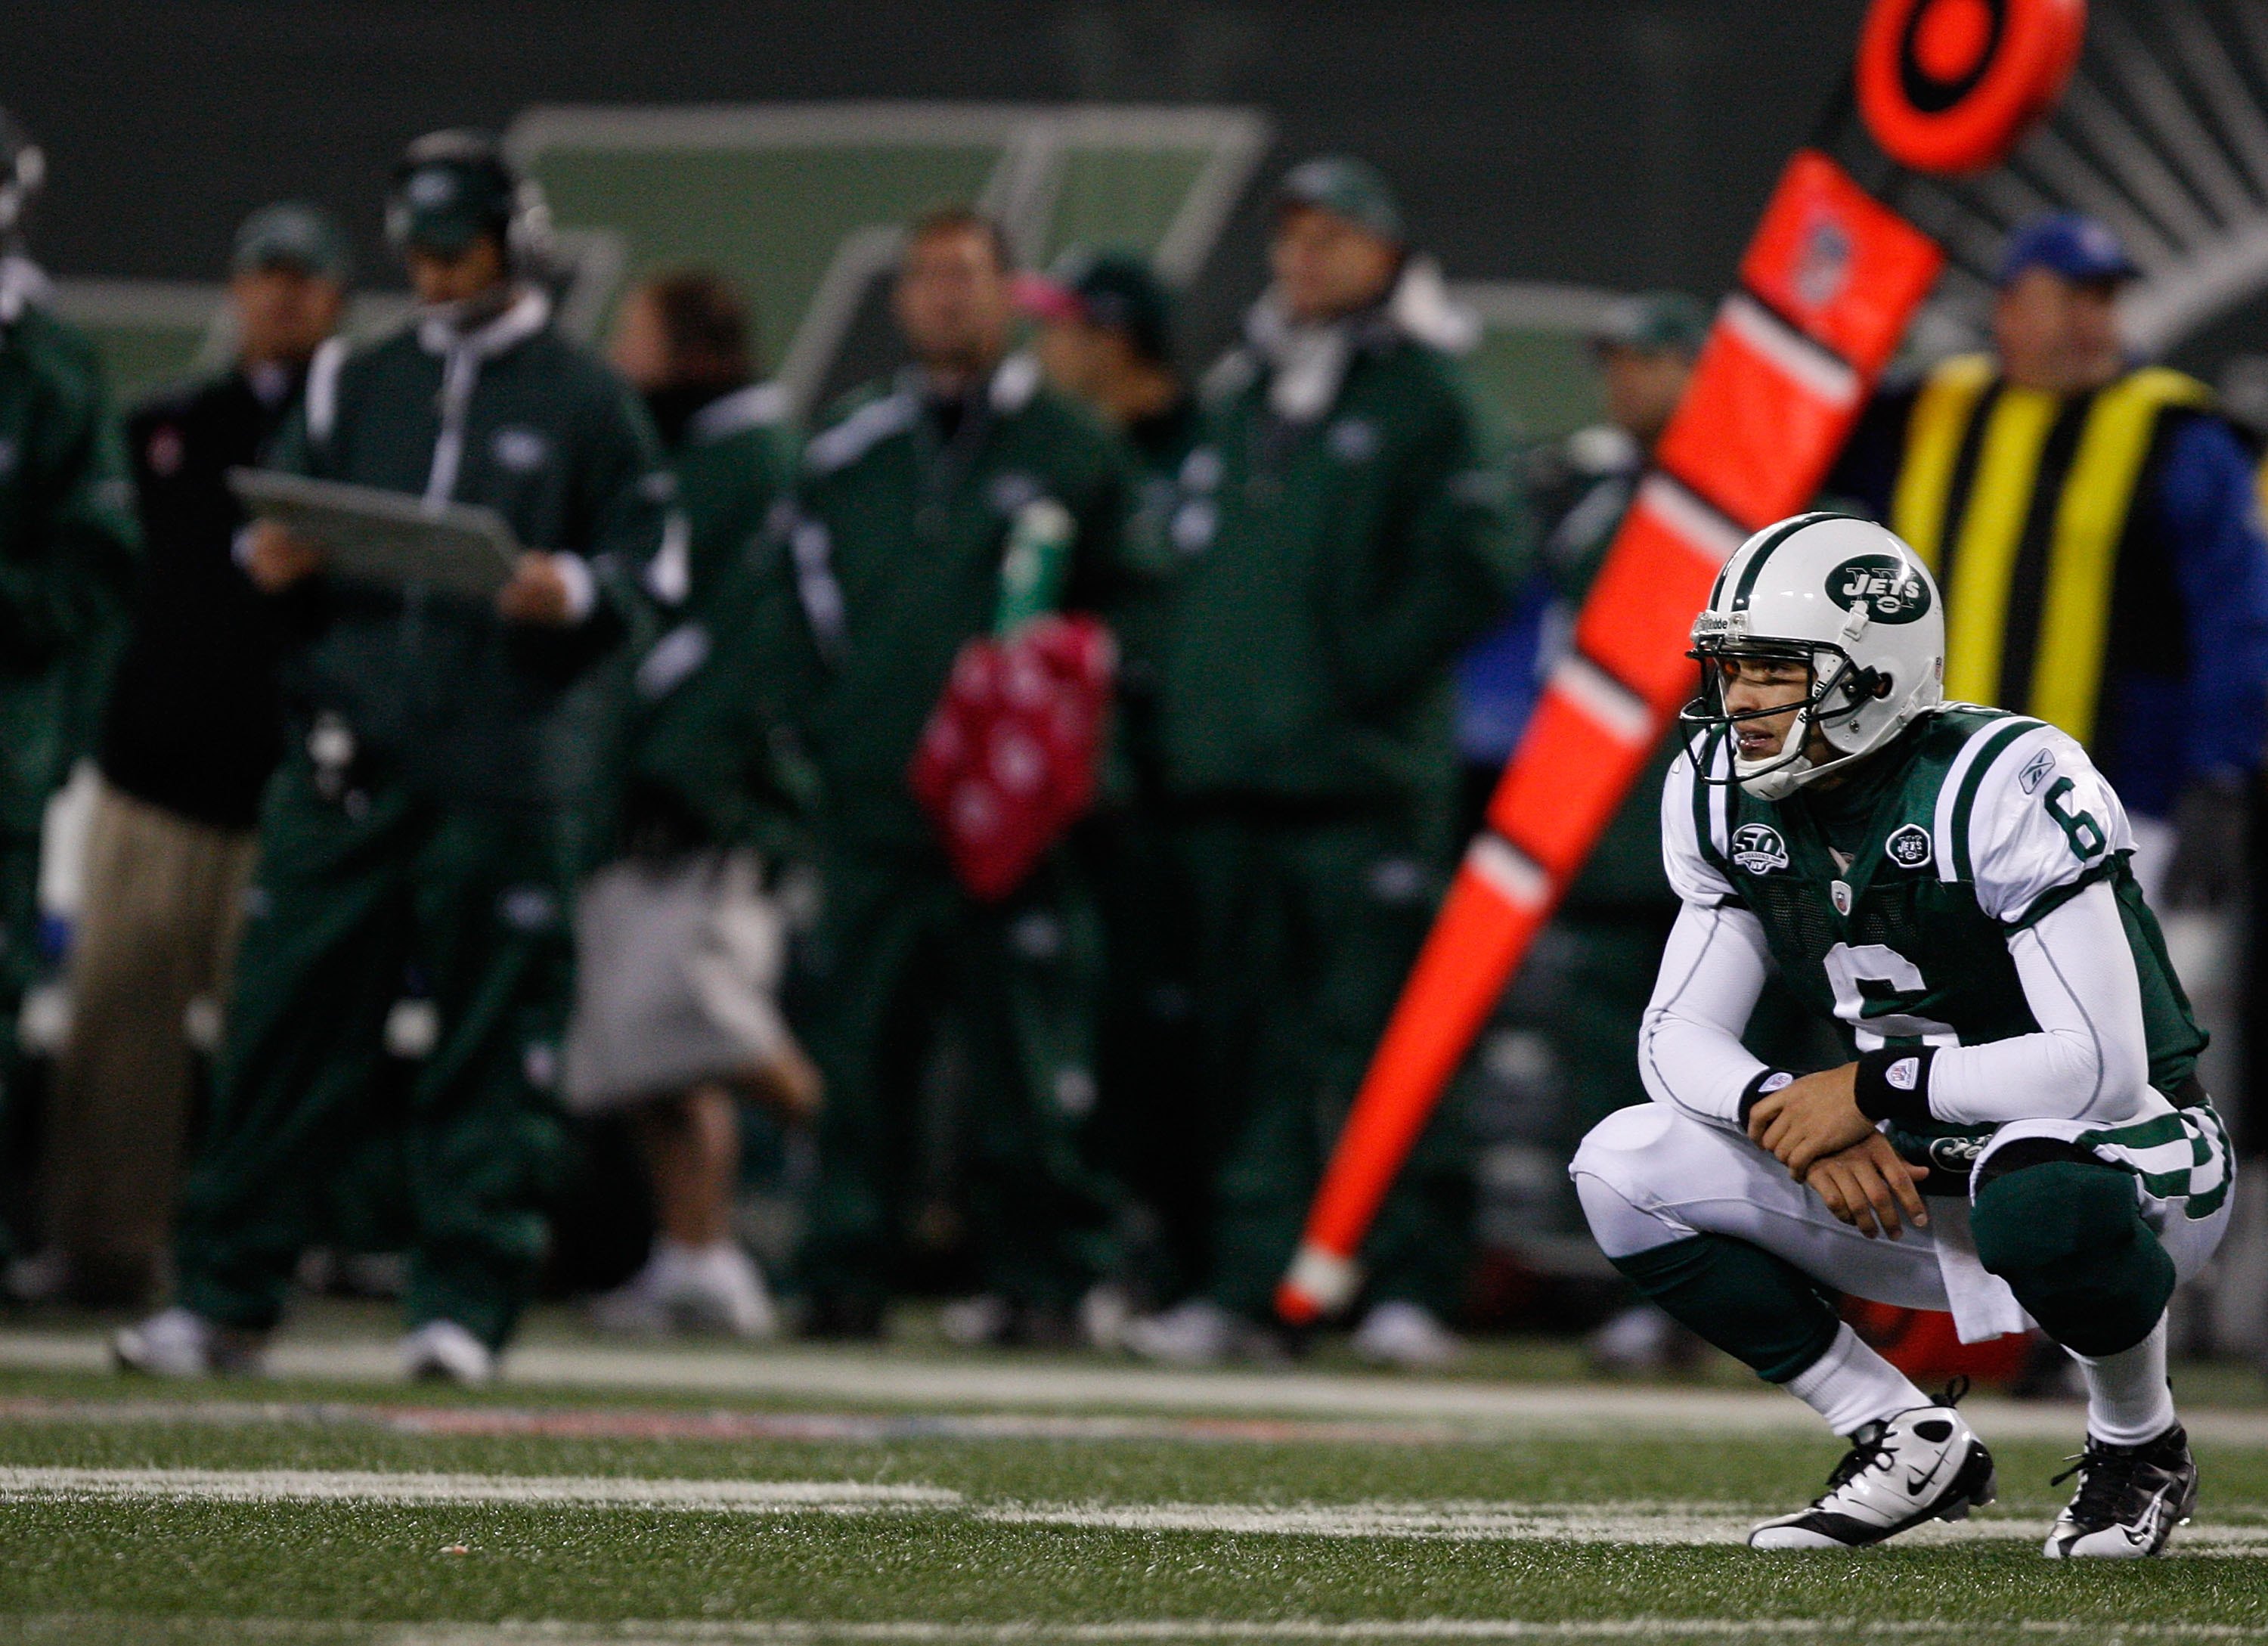 EAST RUTHERFORD, NJ - OCTOBER 18: Mark Sanchez #6 of the New York Jets crouches to the ground after throwing an interception against the Buffalo Bills during the game on October 18, 2009 at Giants Stadium in East Rutherford, New Jersey. The Bills defeated